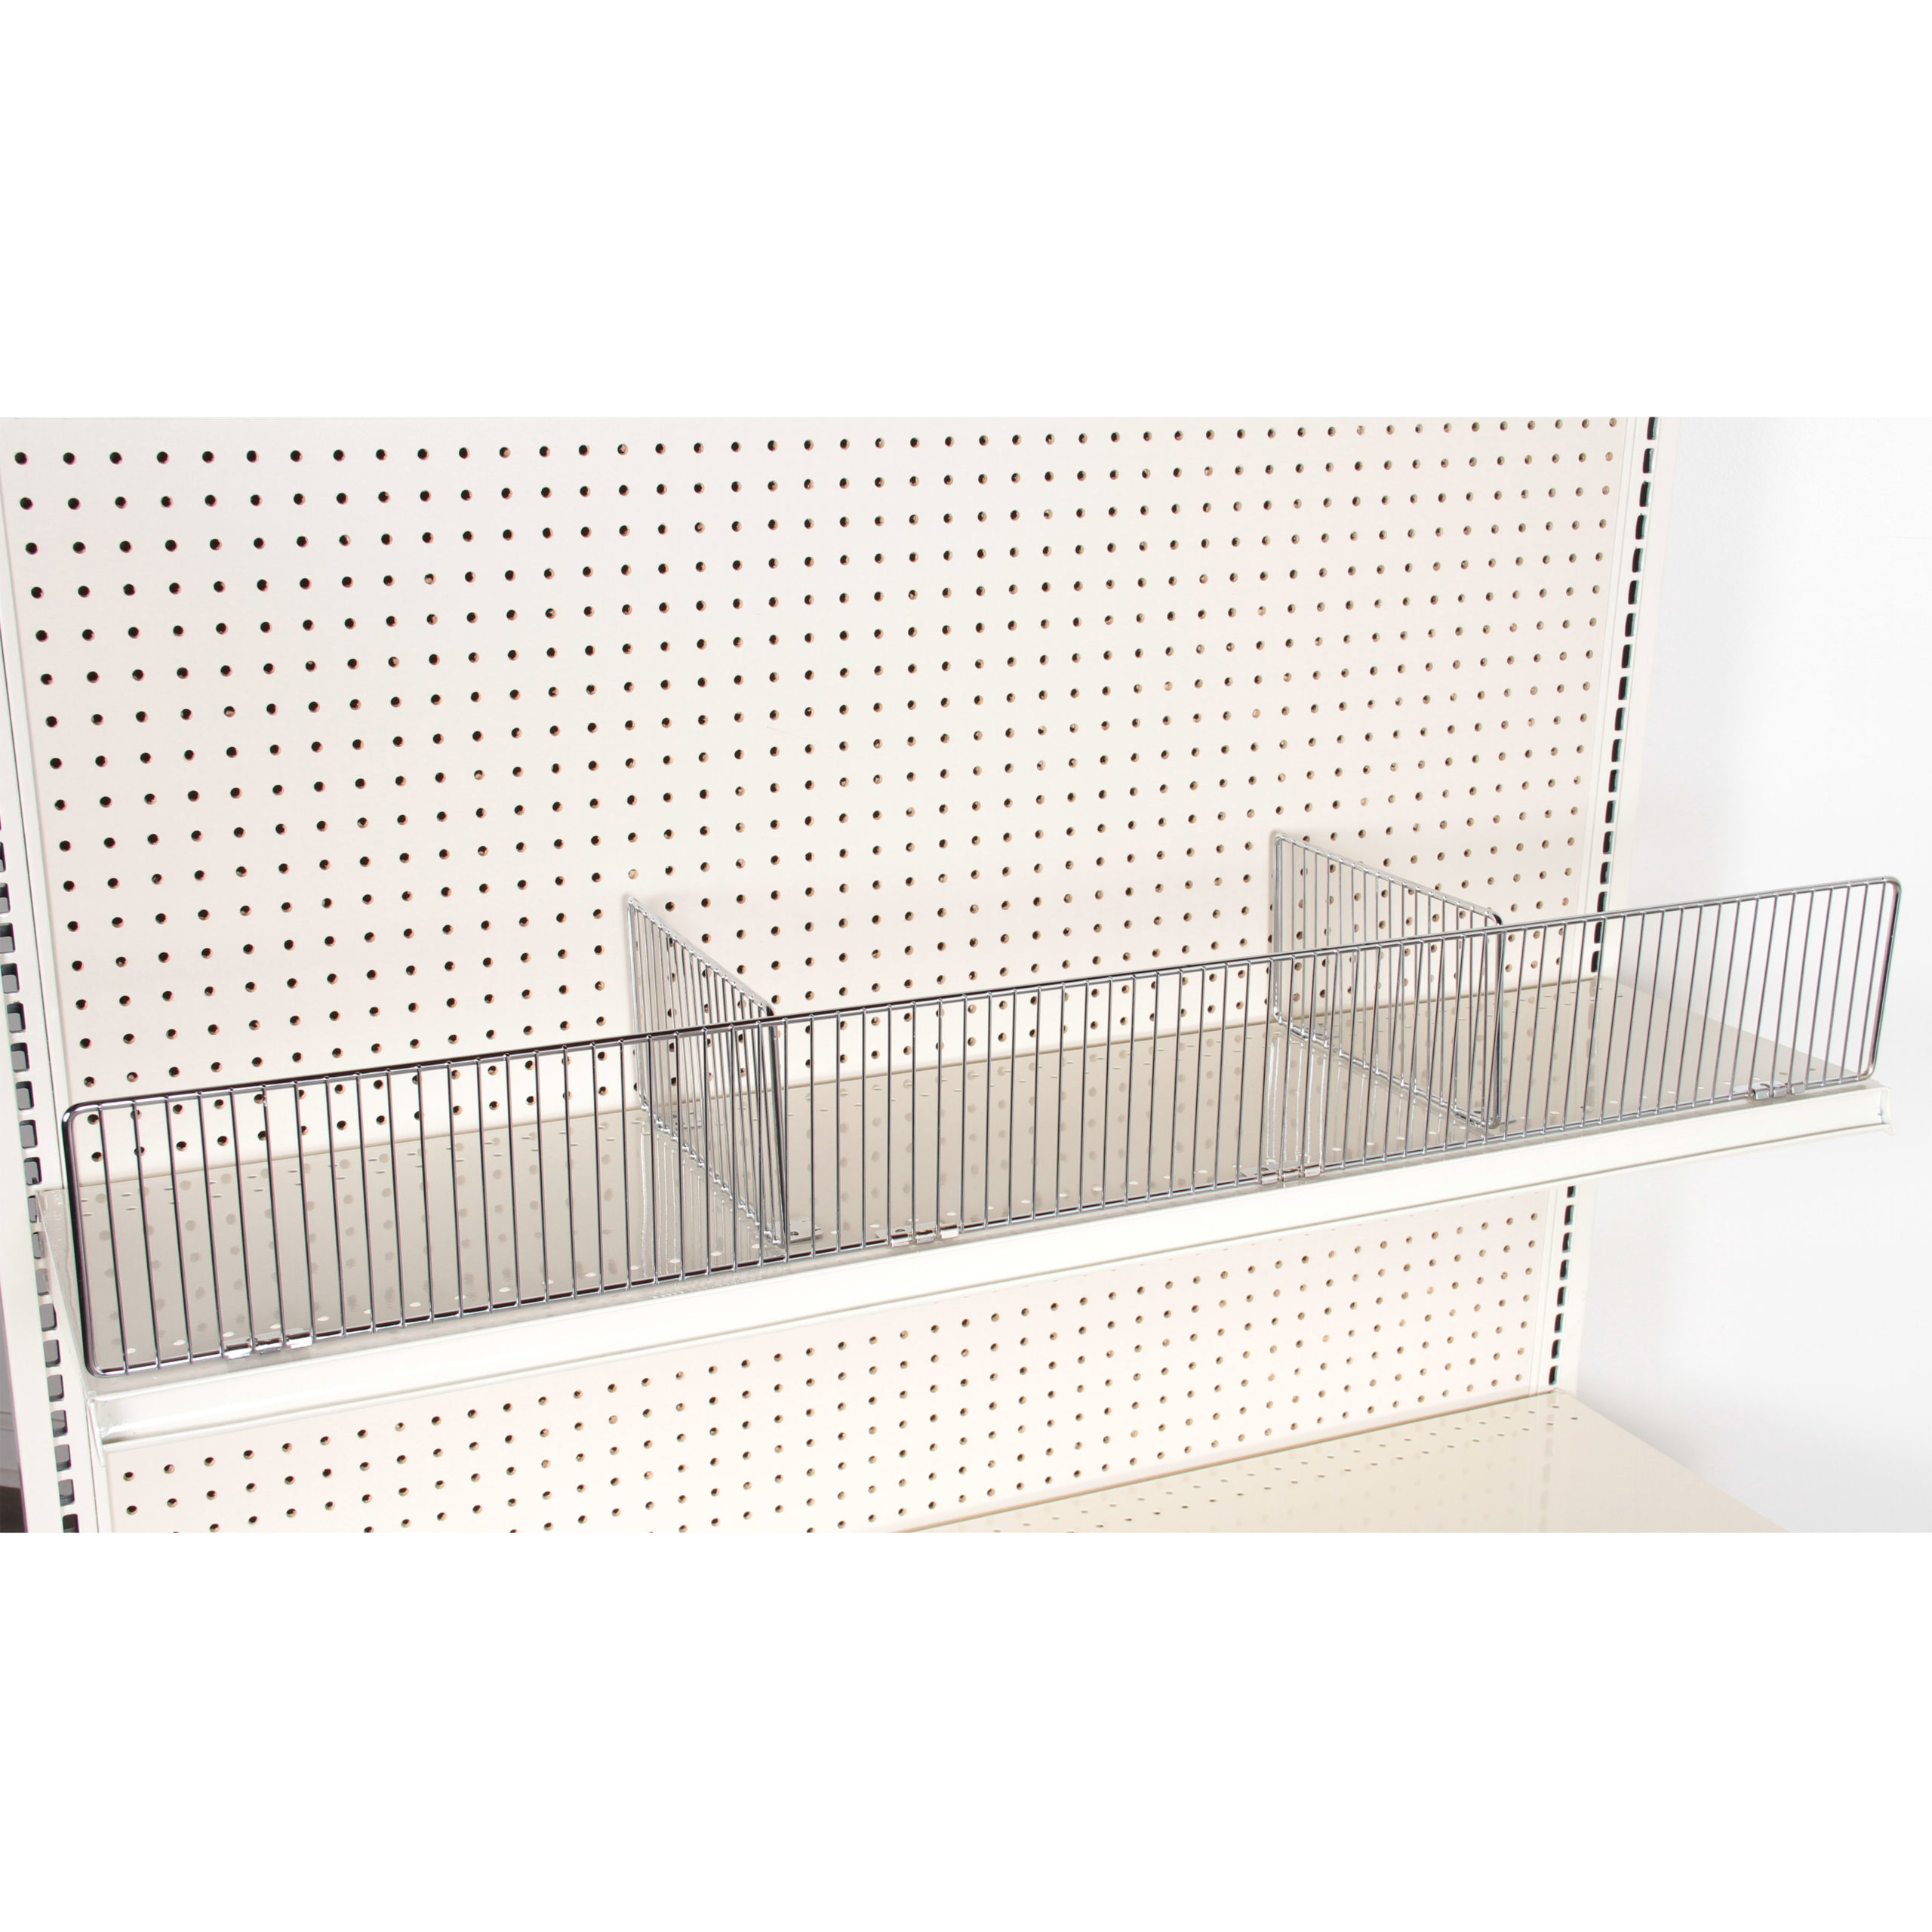 Gondola Lot of 50 Shelf Divider Fence Chrome Streater 13" x 3" Made In USA  NEW 